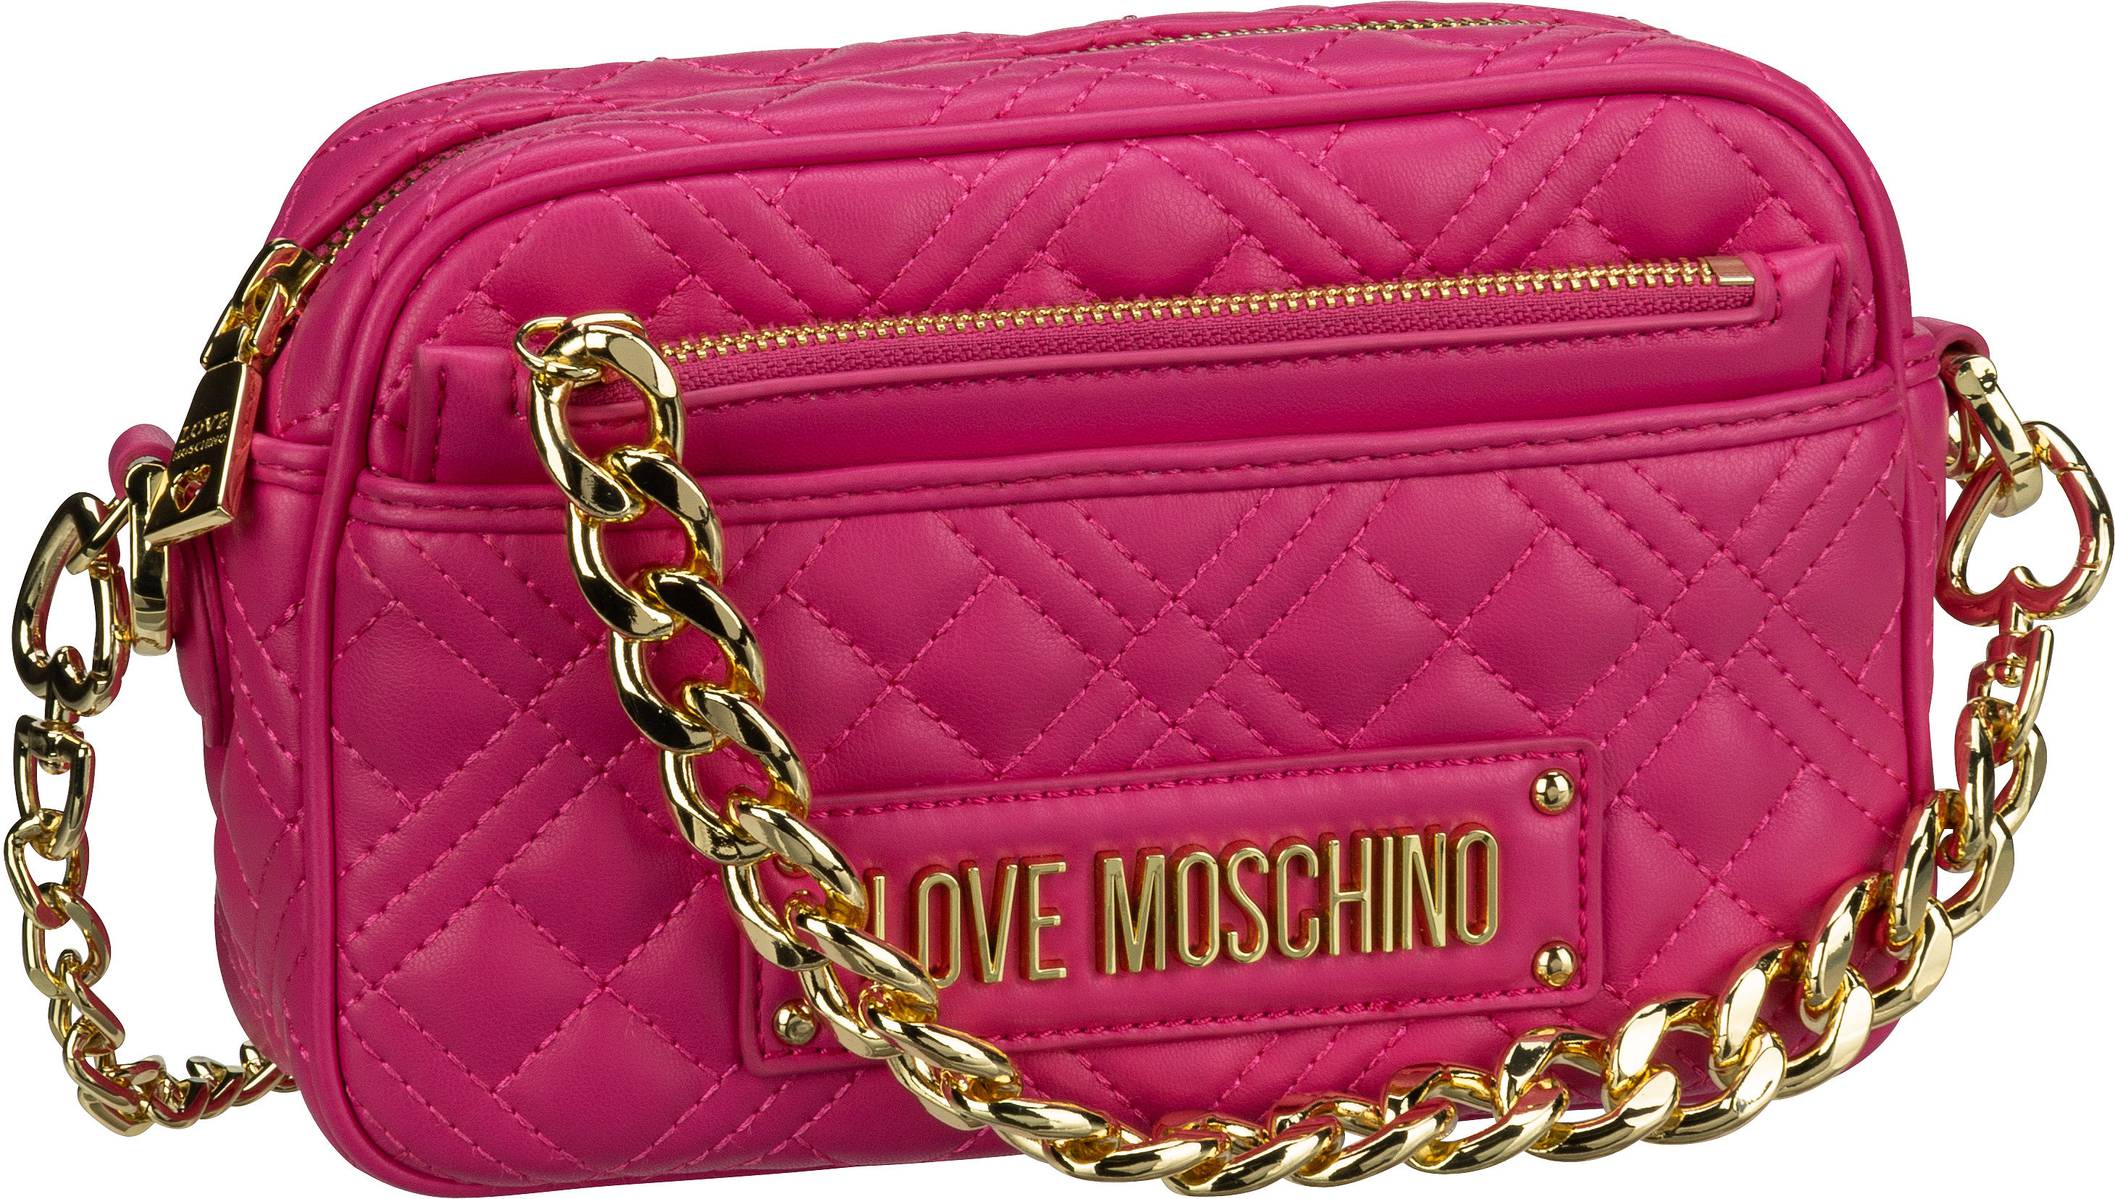 Love Moschino Quilted Bag Pocket 4017 - Fuchsia